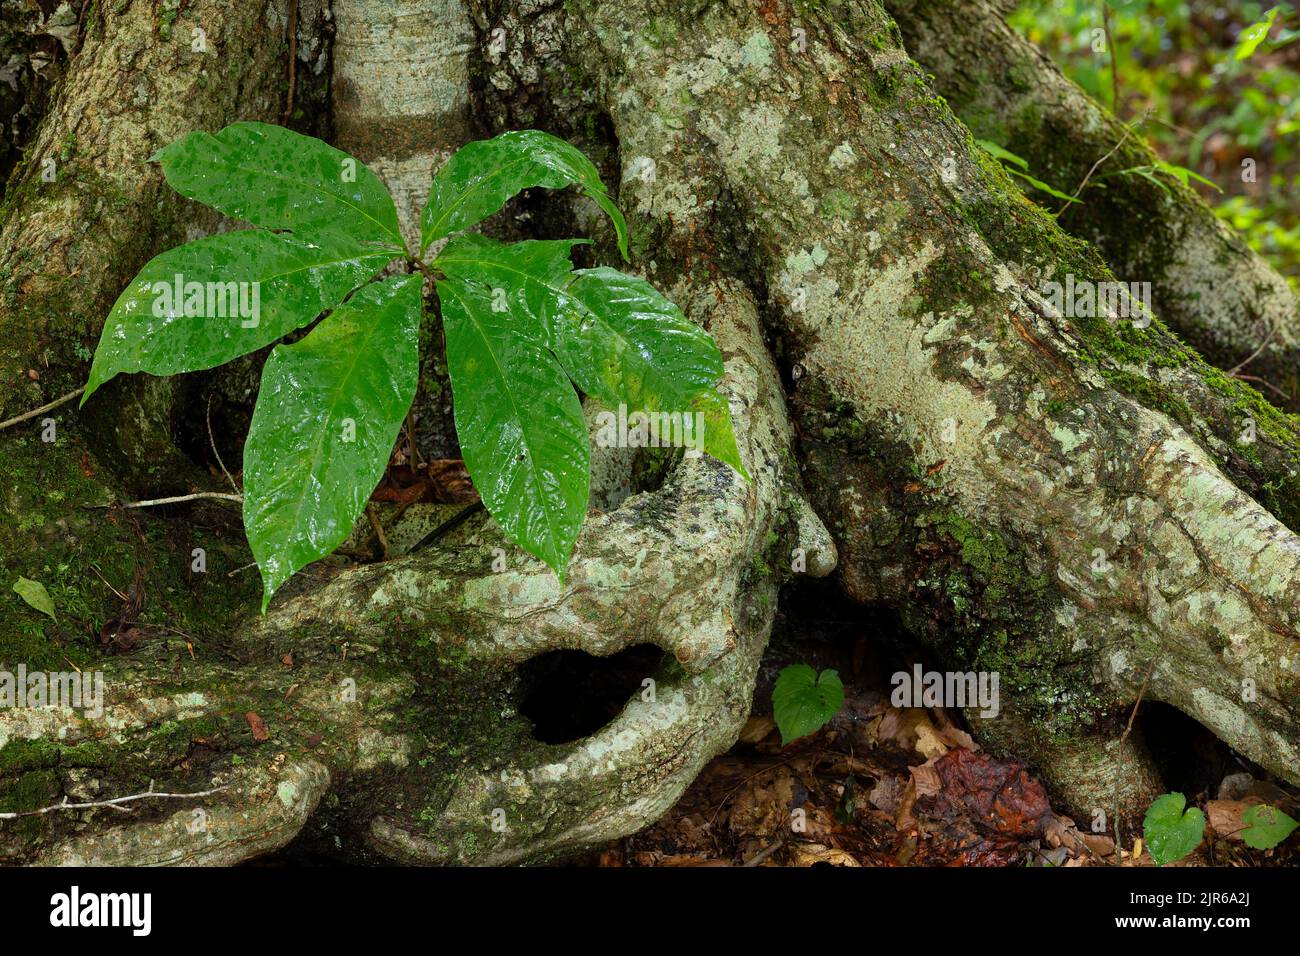 Large green leaves plant grows at the base of a tree and it's roots. Stock Photo